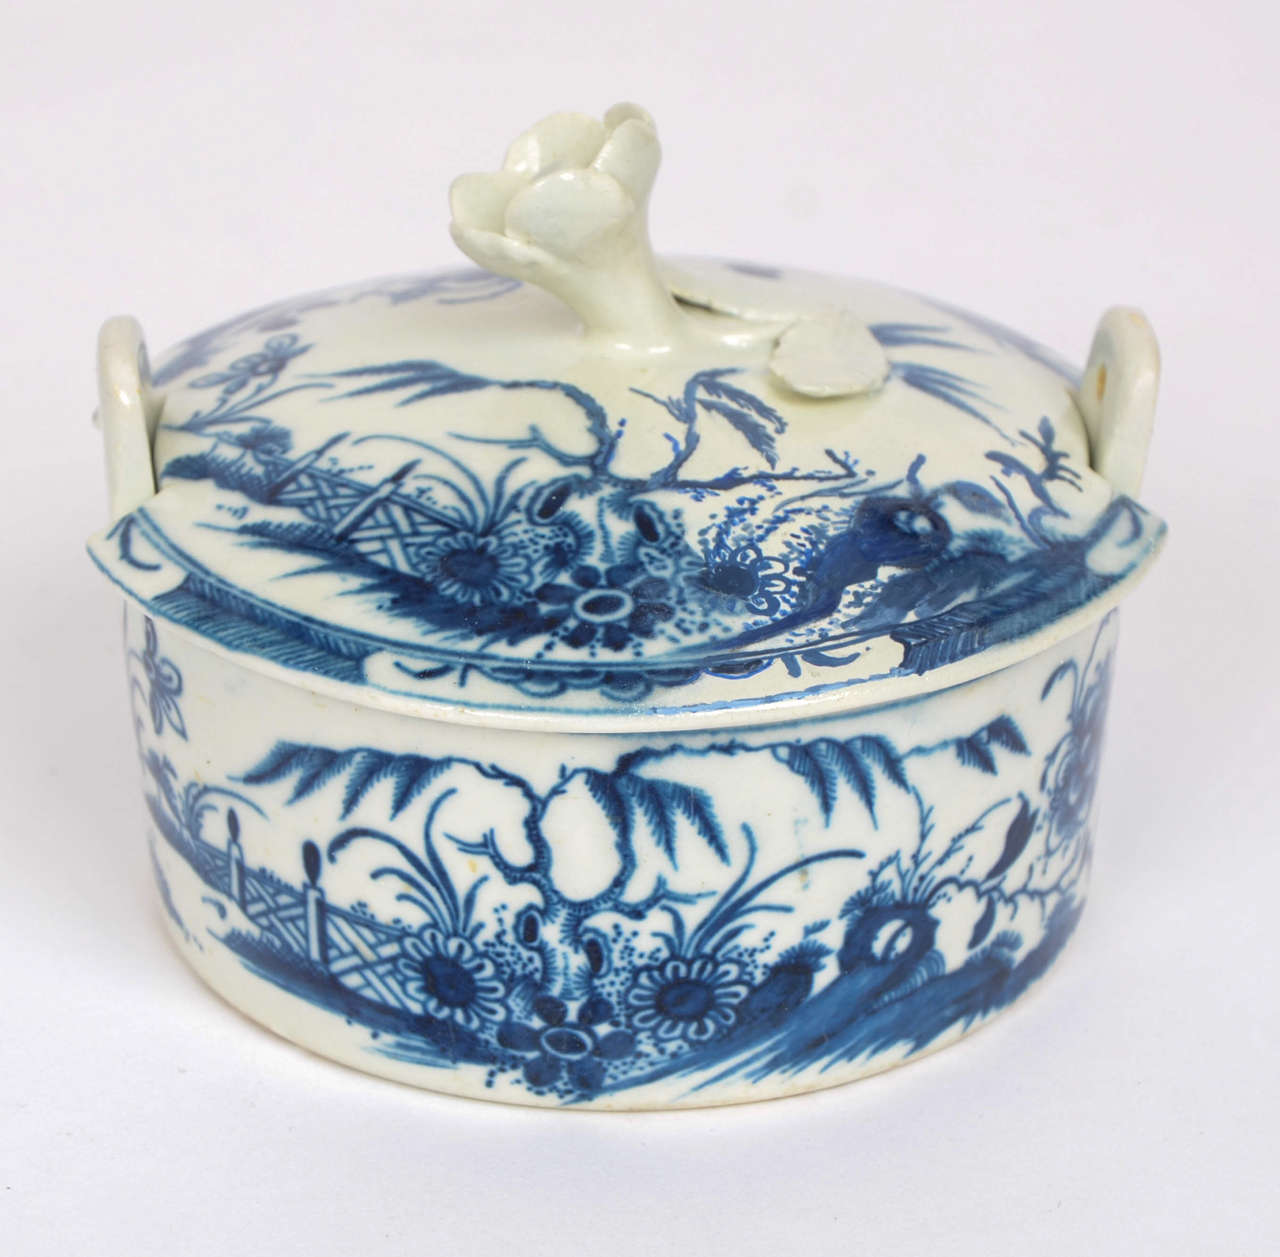 British Rare, First Period, Worcester Blue and White, Porcelain Butter Tub, Fence Pat'n